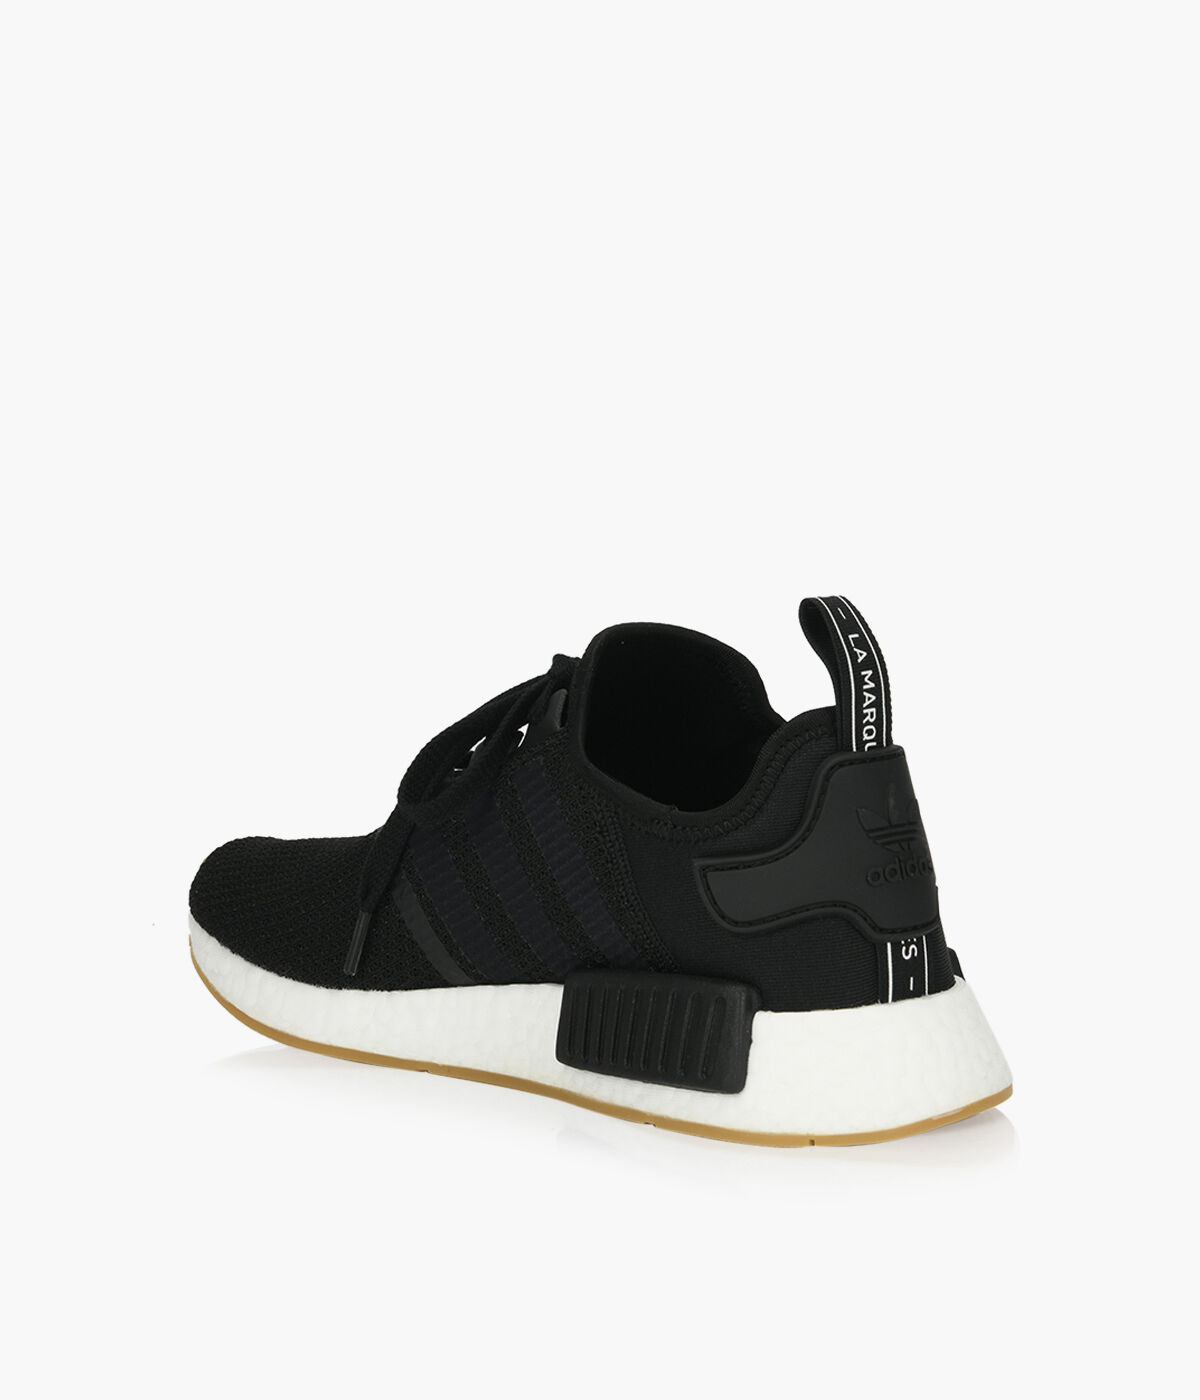 ADIDAS NMD R1 - Black Fabric | Browns Shoes